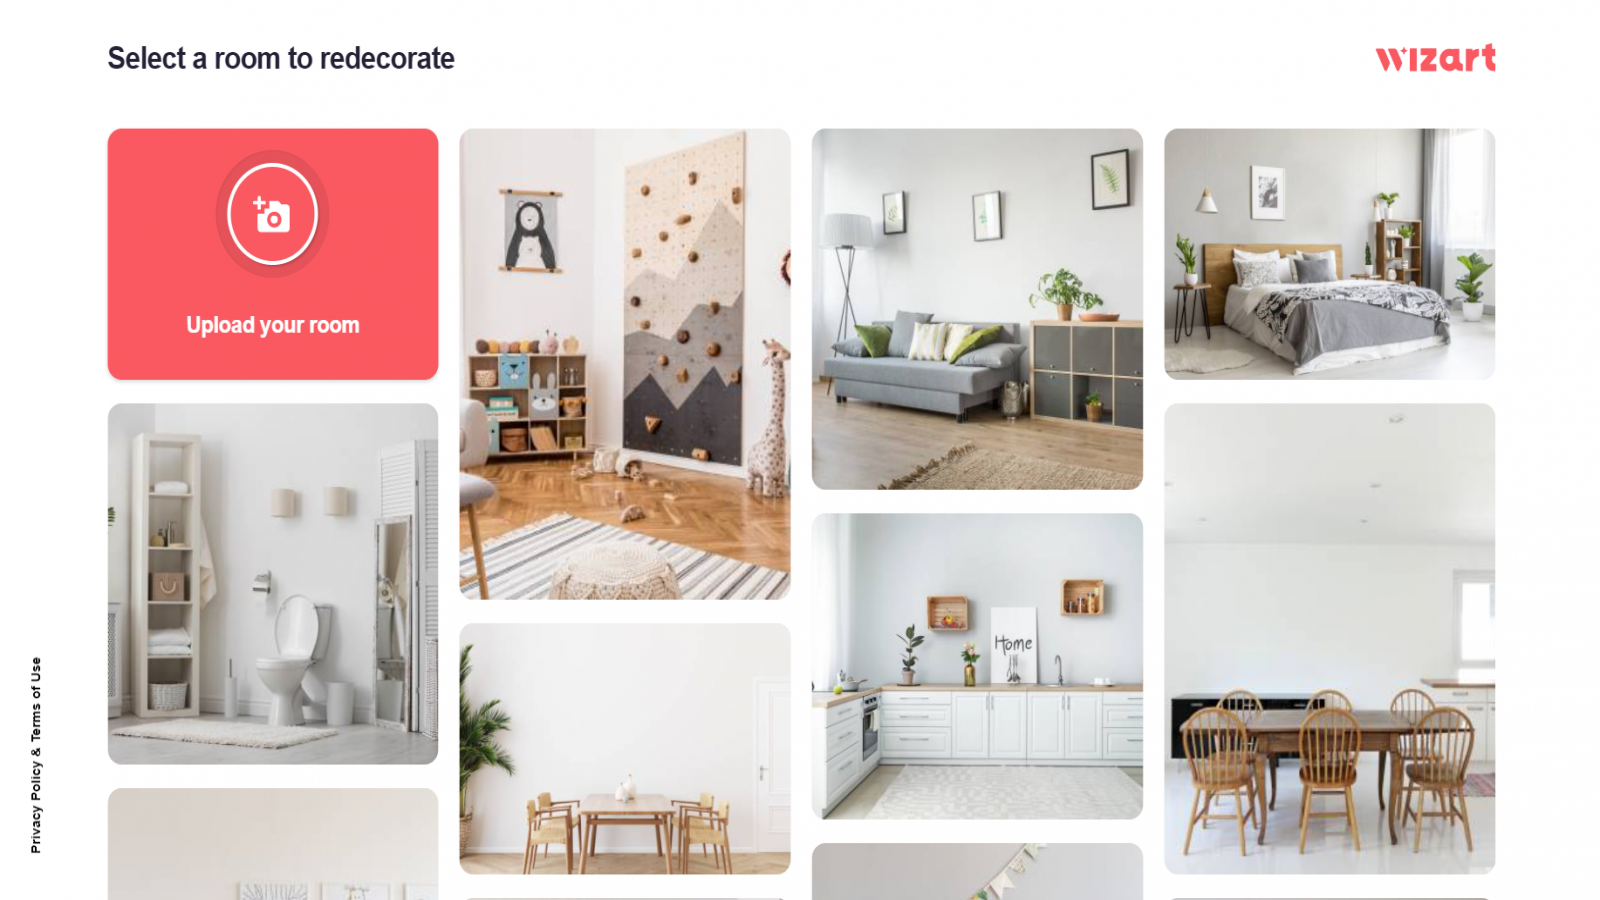 Select a room scene/snap a photo of your room and upload it.